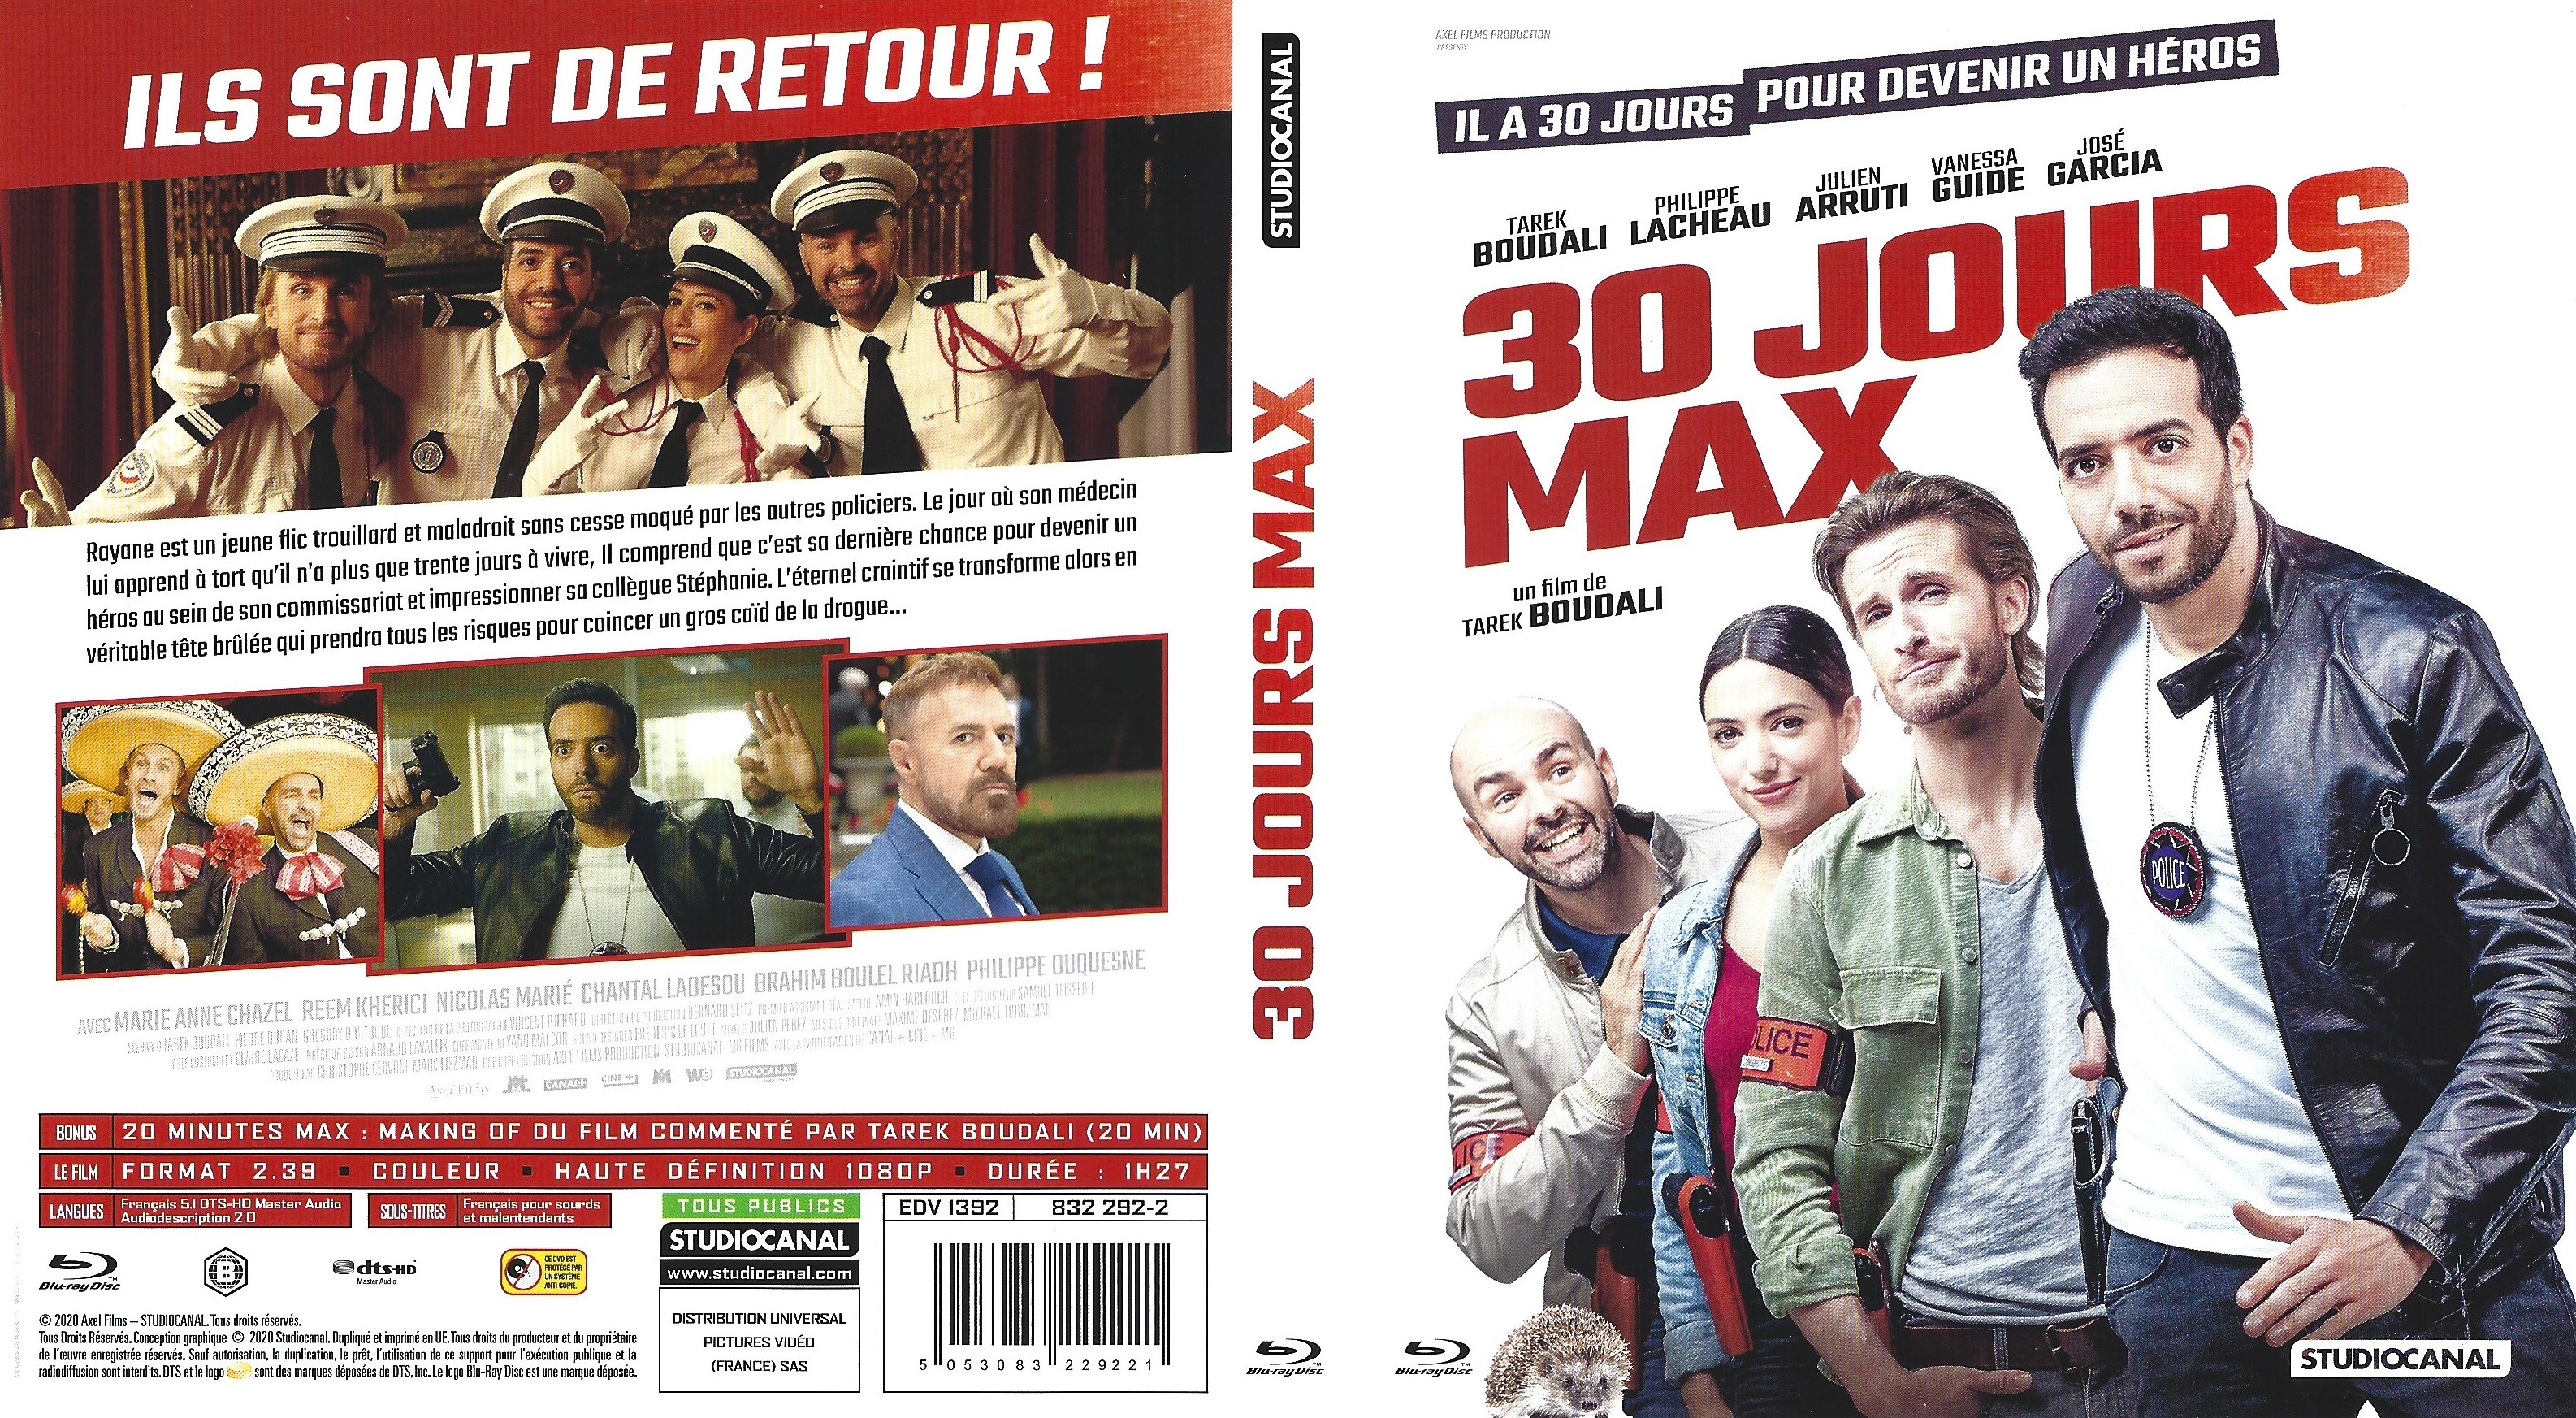 Jaquette DVD 30 jours max (BLU-RAY)